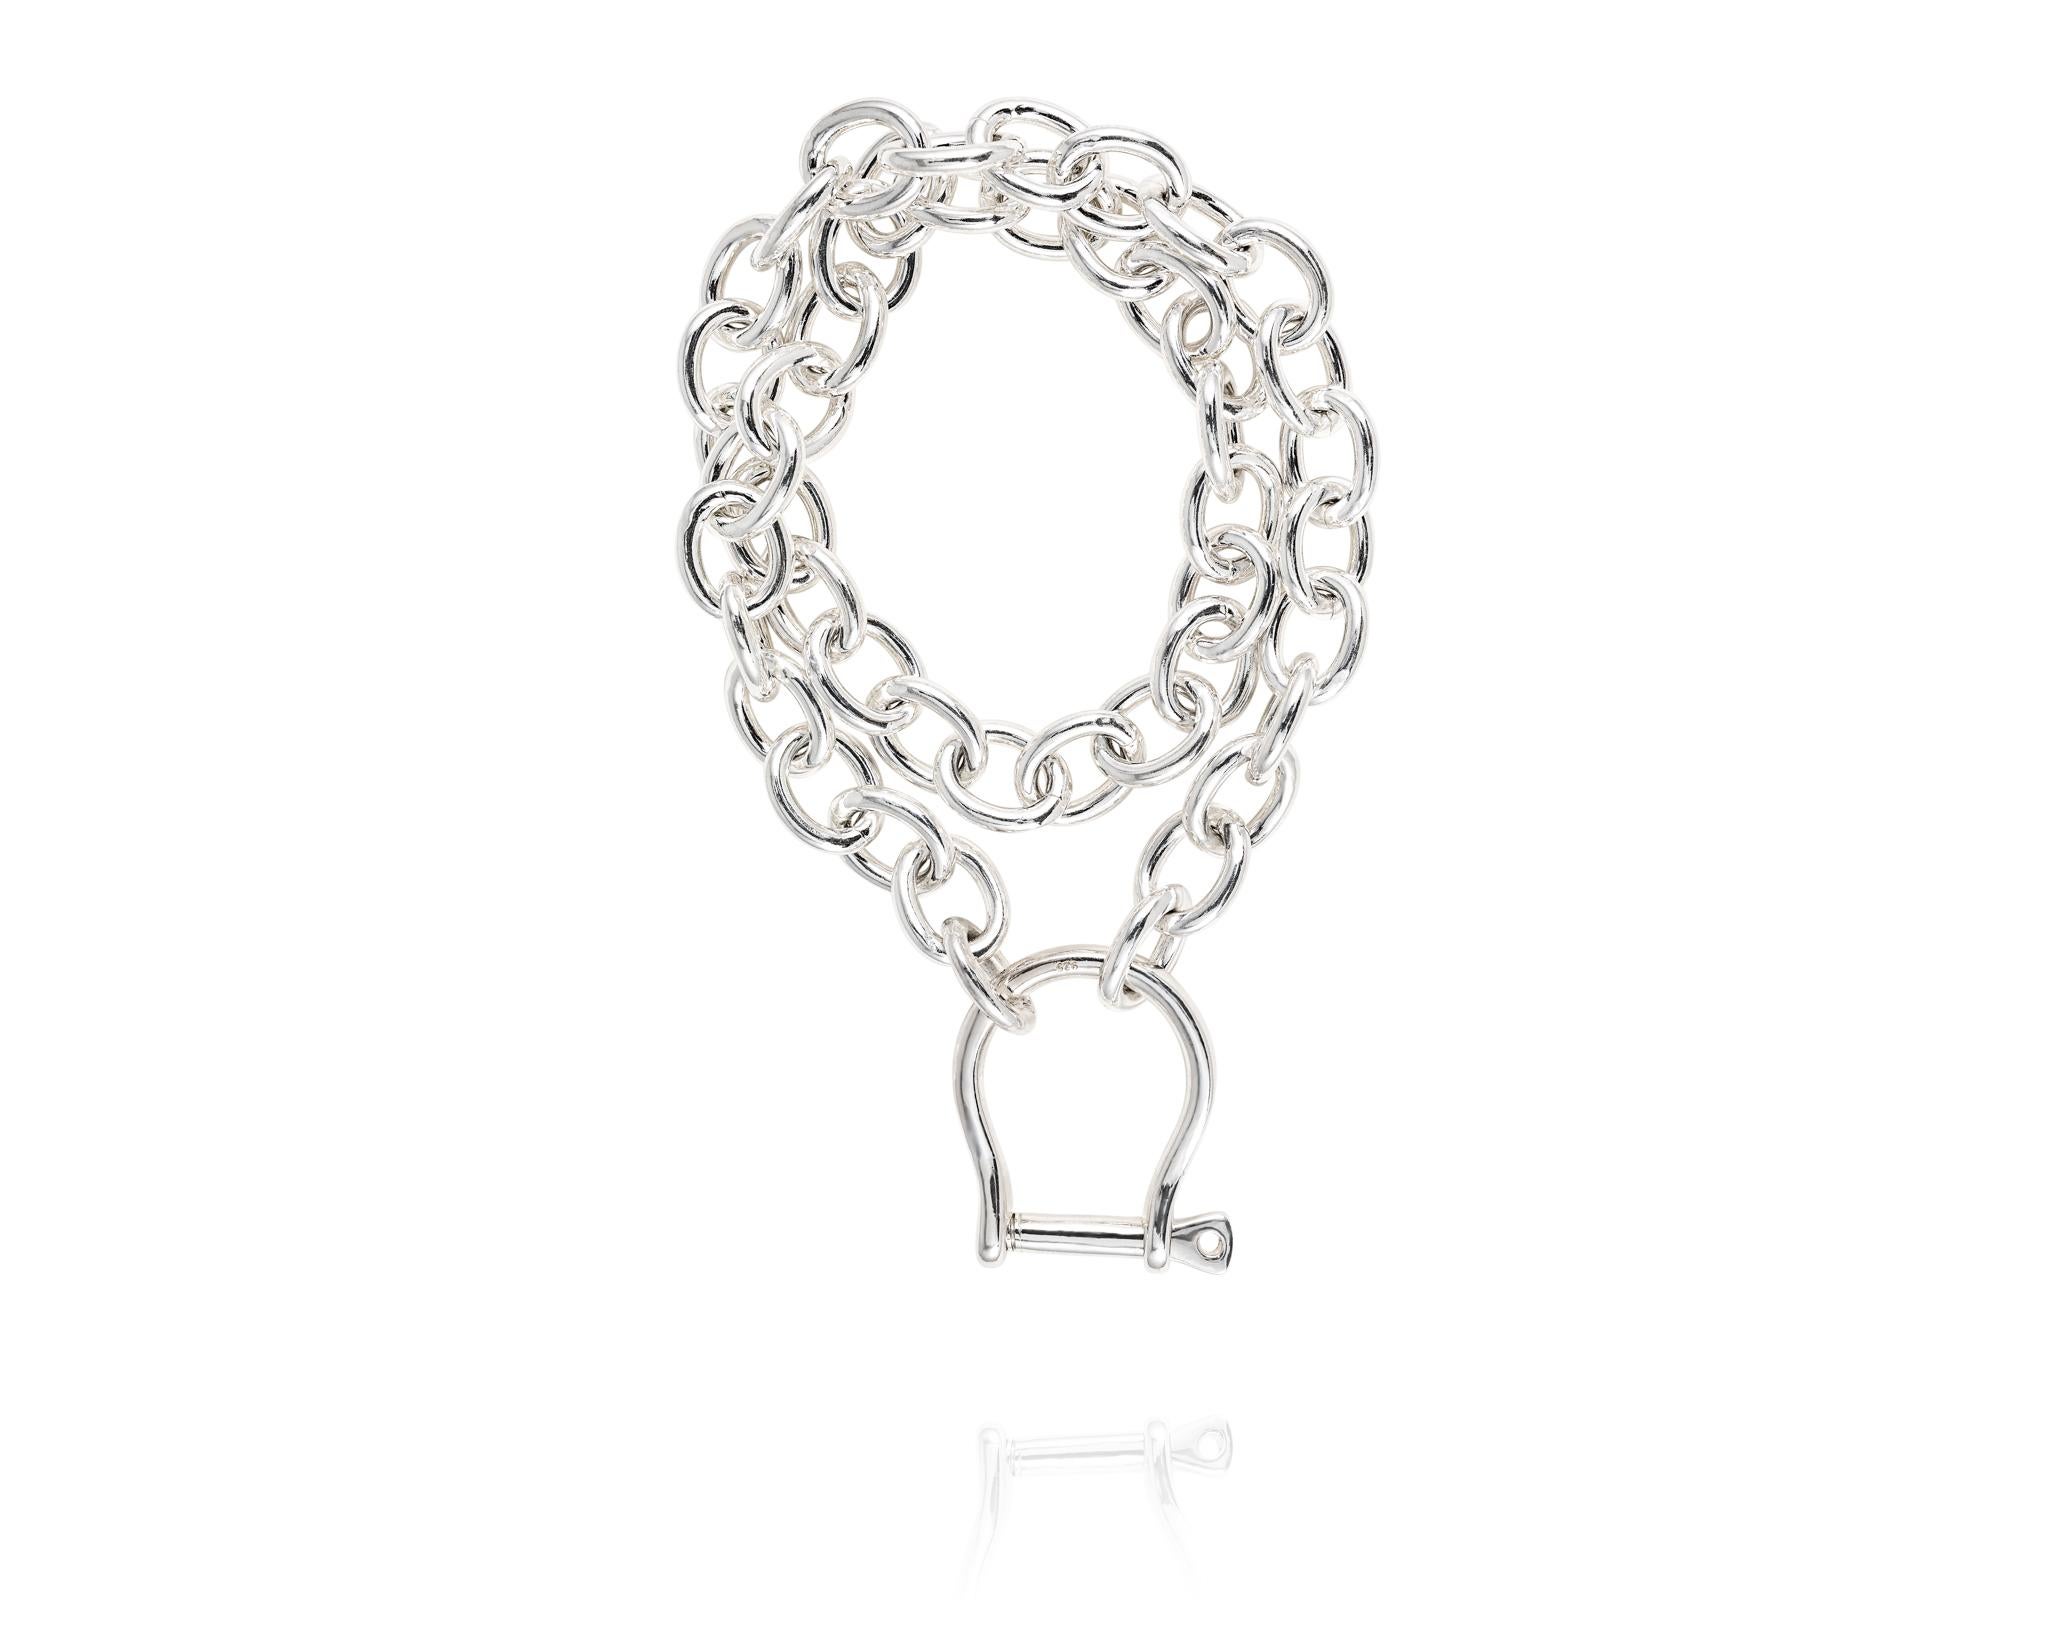 Part of the Vincent Peach Equestrian Collection, the Shackle Necklace has a luxurious Sterling Silver Shackle Pendant with Removable Screw to hold it together on a 17